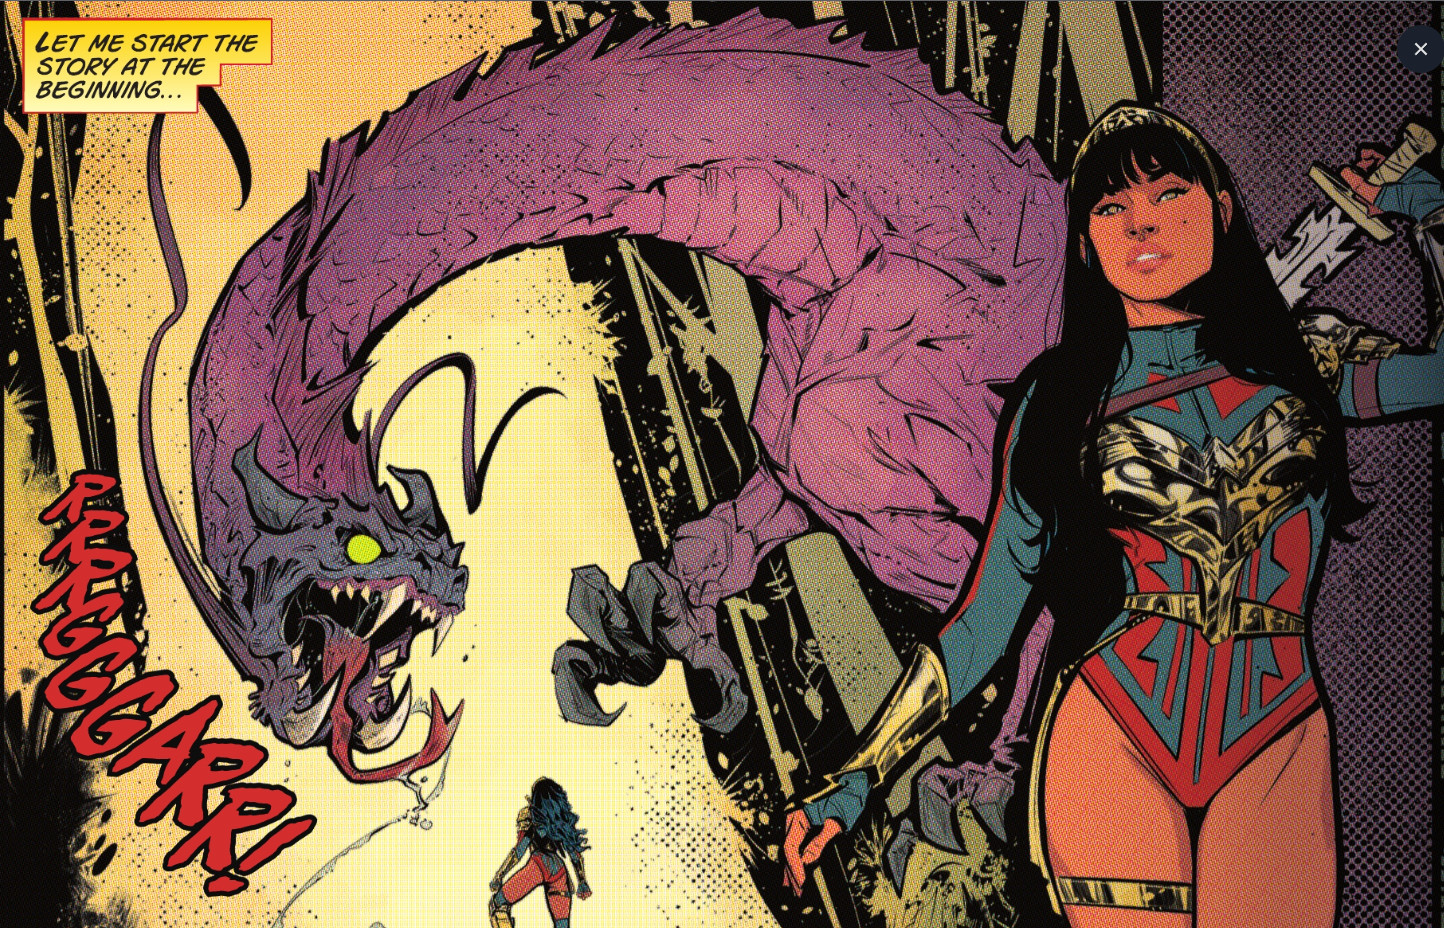 Panel from Future State: Wonder Woman #1, with Zara as Wonder Woman fighting a large purple monster